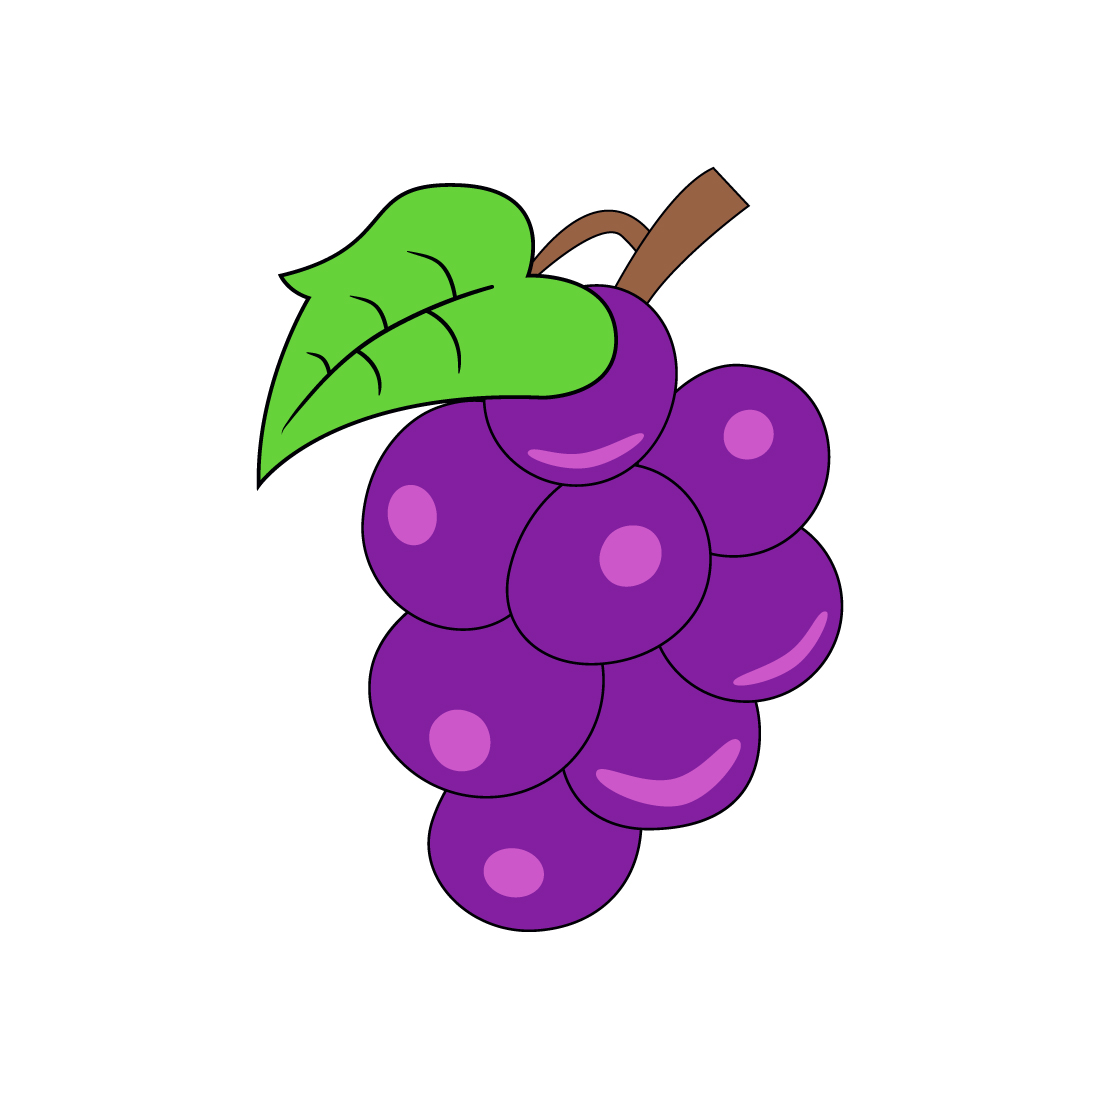 Grapes Illustration On White Background preview image.